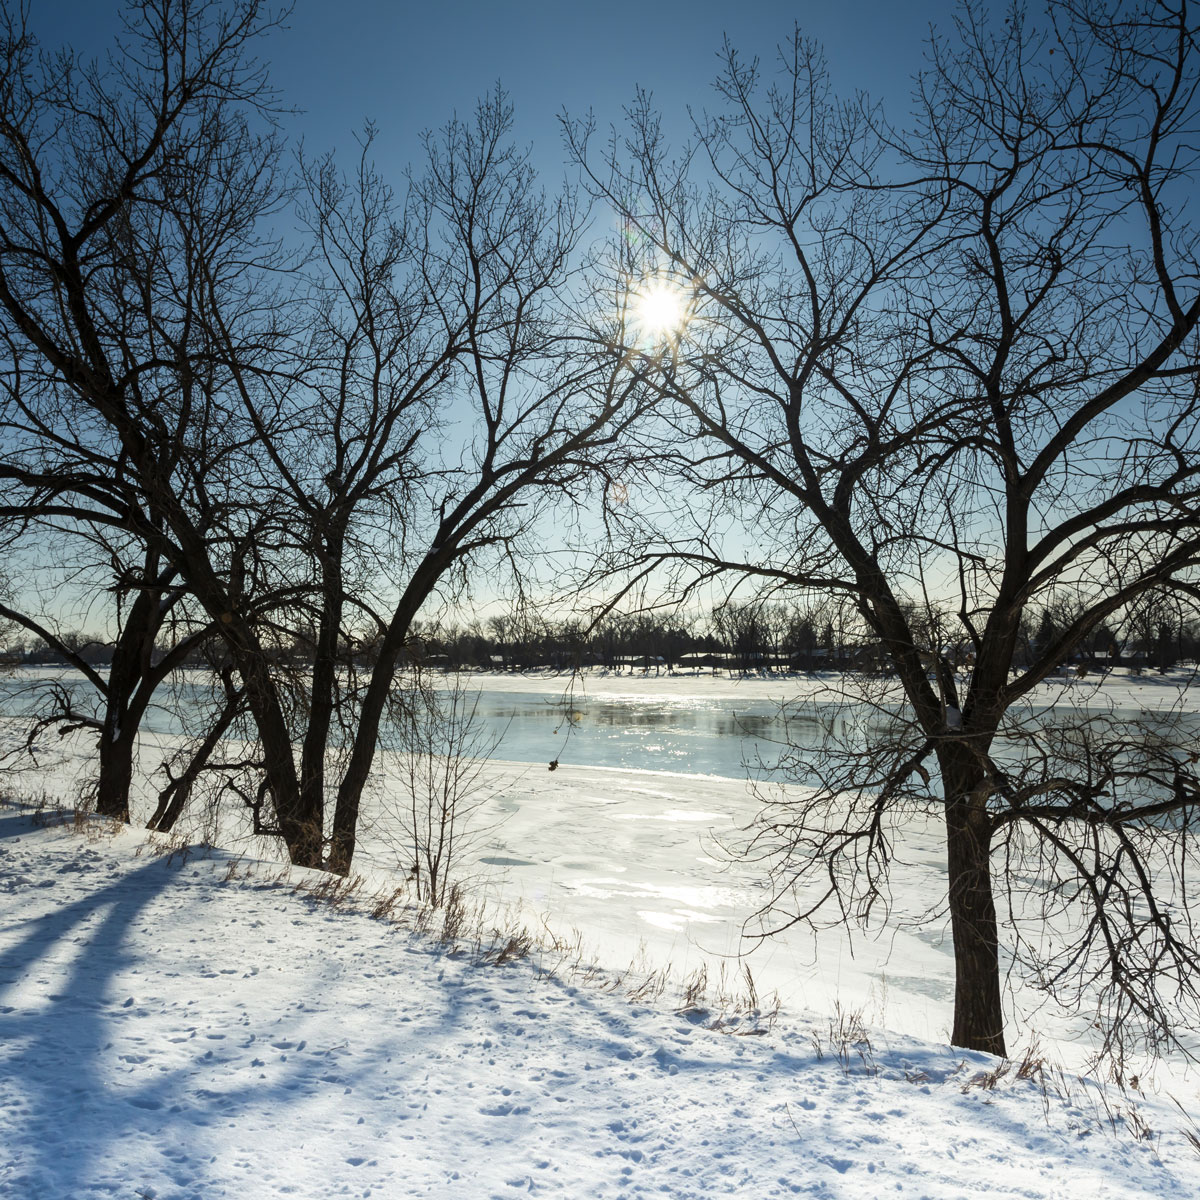 Surrounded by snow two barren trees appear to hold a winter star burst sun in the blue sky while framing a view of a frozen Missouri River in Bismarck, North Dakota.